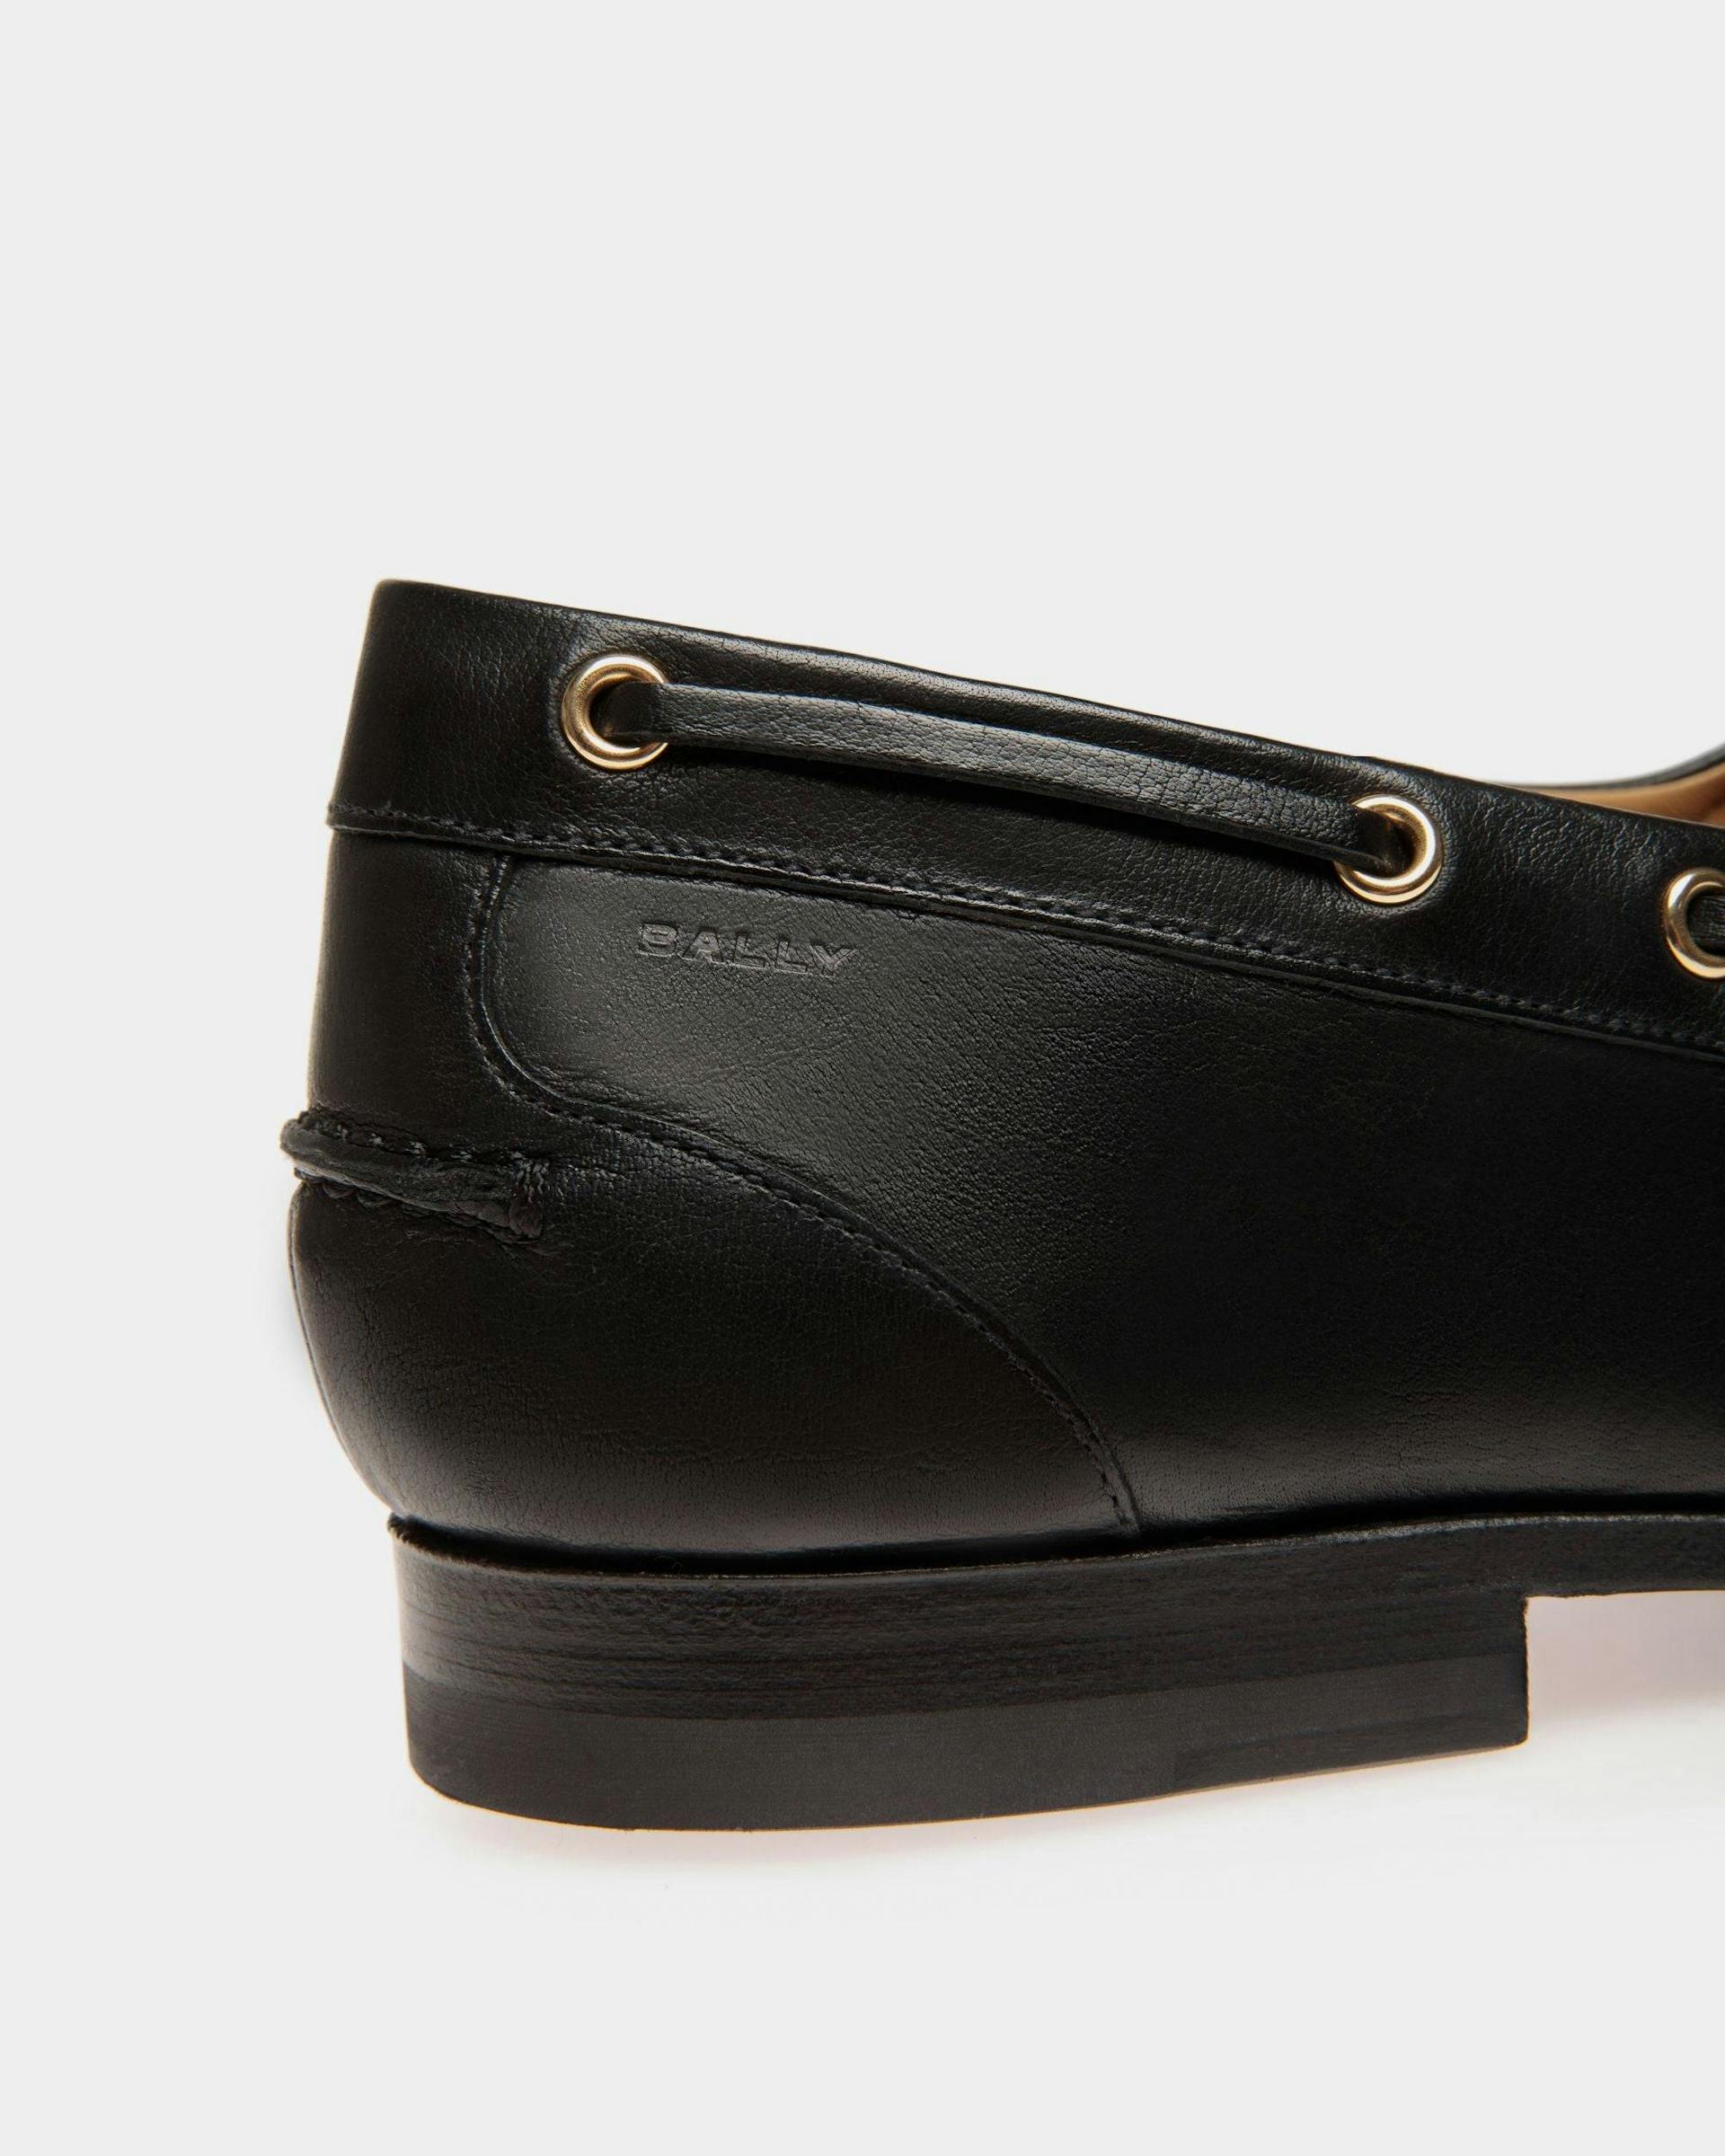 Men's Plume Moccasin in Black Leather | Bally | Still Life Detail